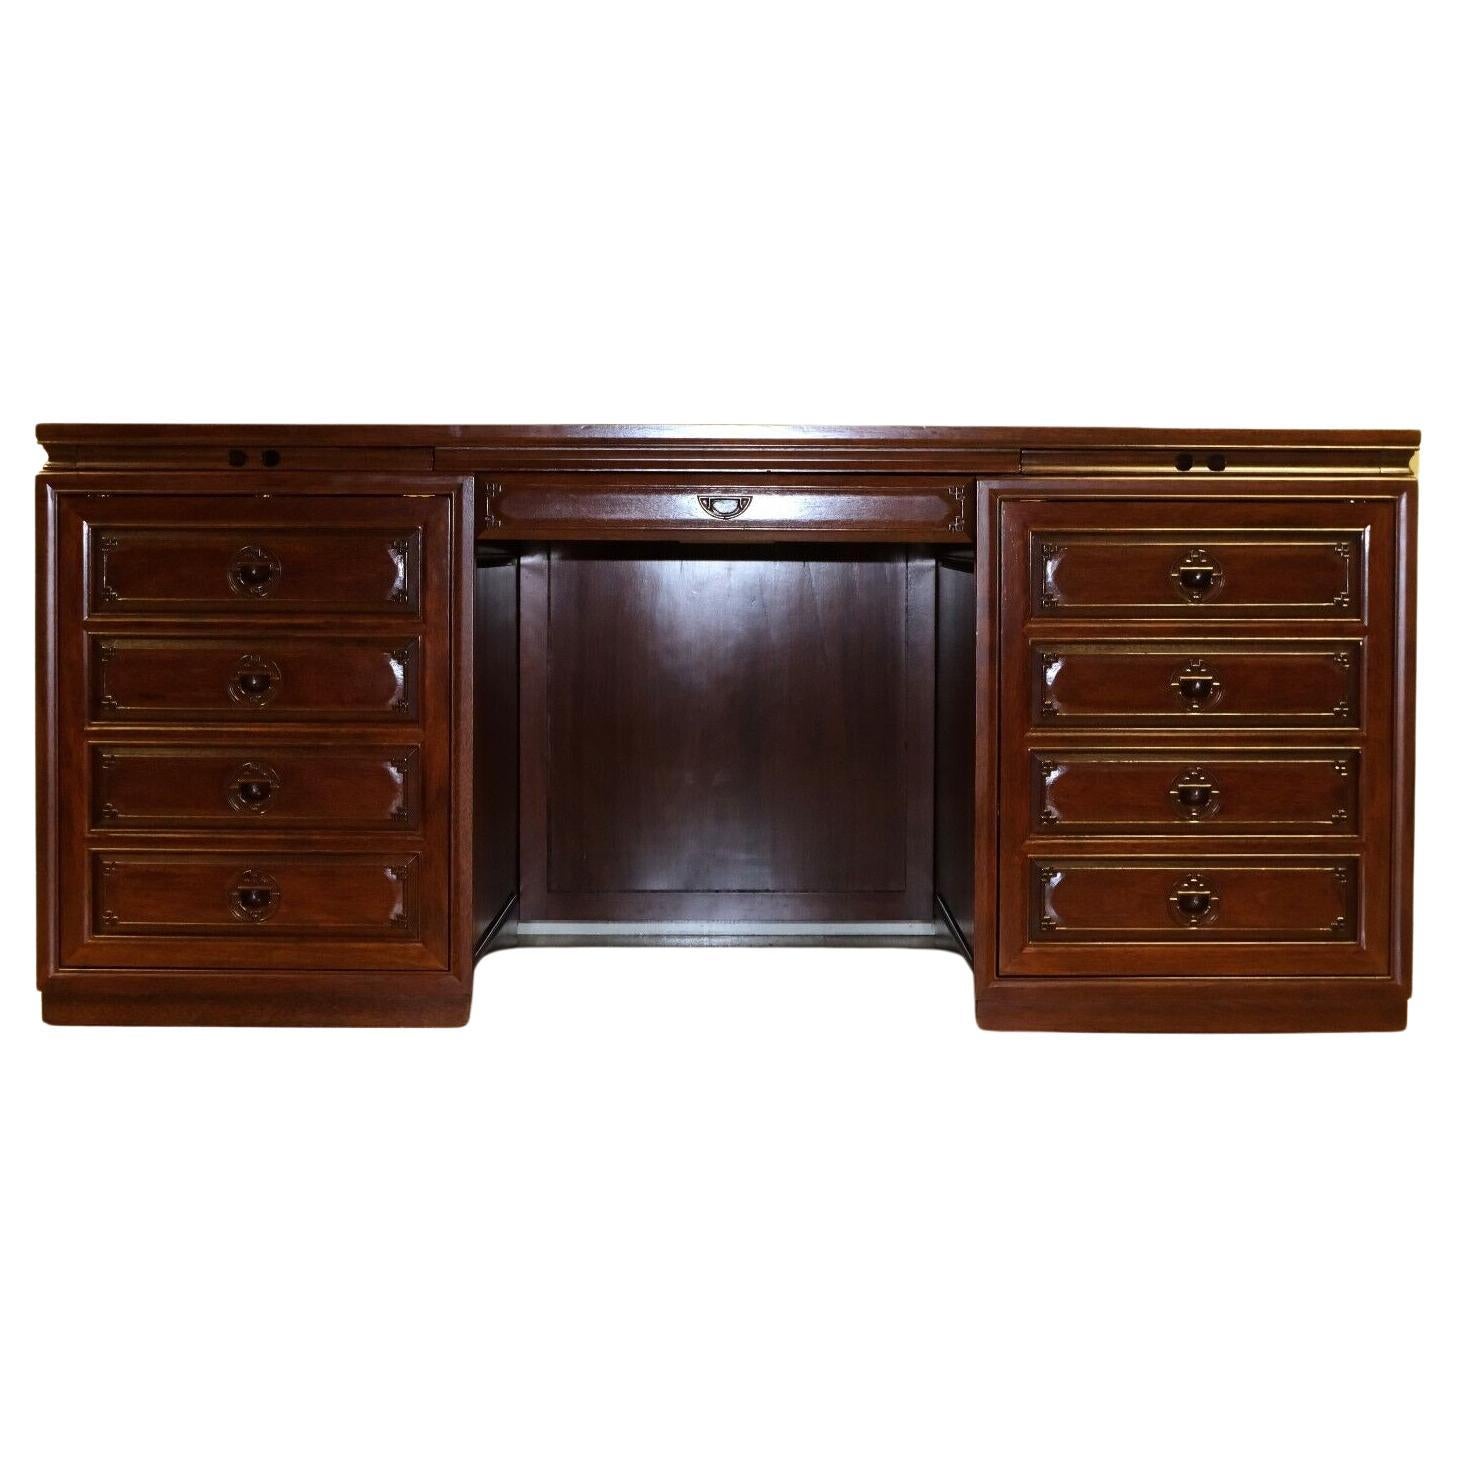 We are delighted to offer for sale this lovely 20th Century Chinese Hardwood pedestal desk with small drawers and sliding shelves.

To start, this piece is presented under the top of a central drawer and a pair of brushing slides which are divided